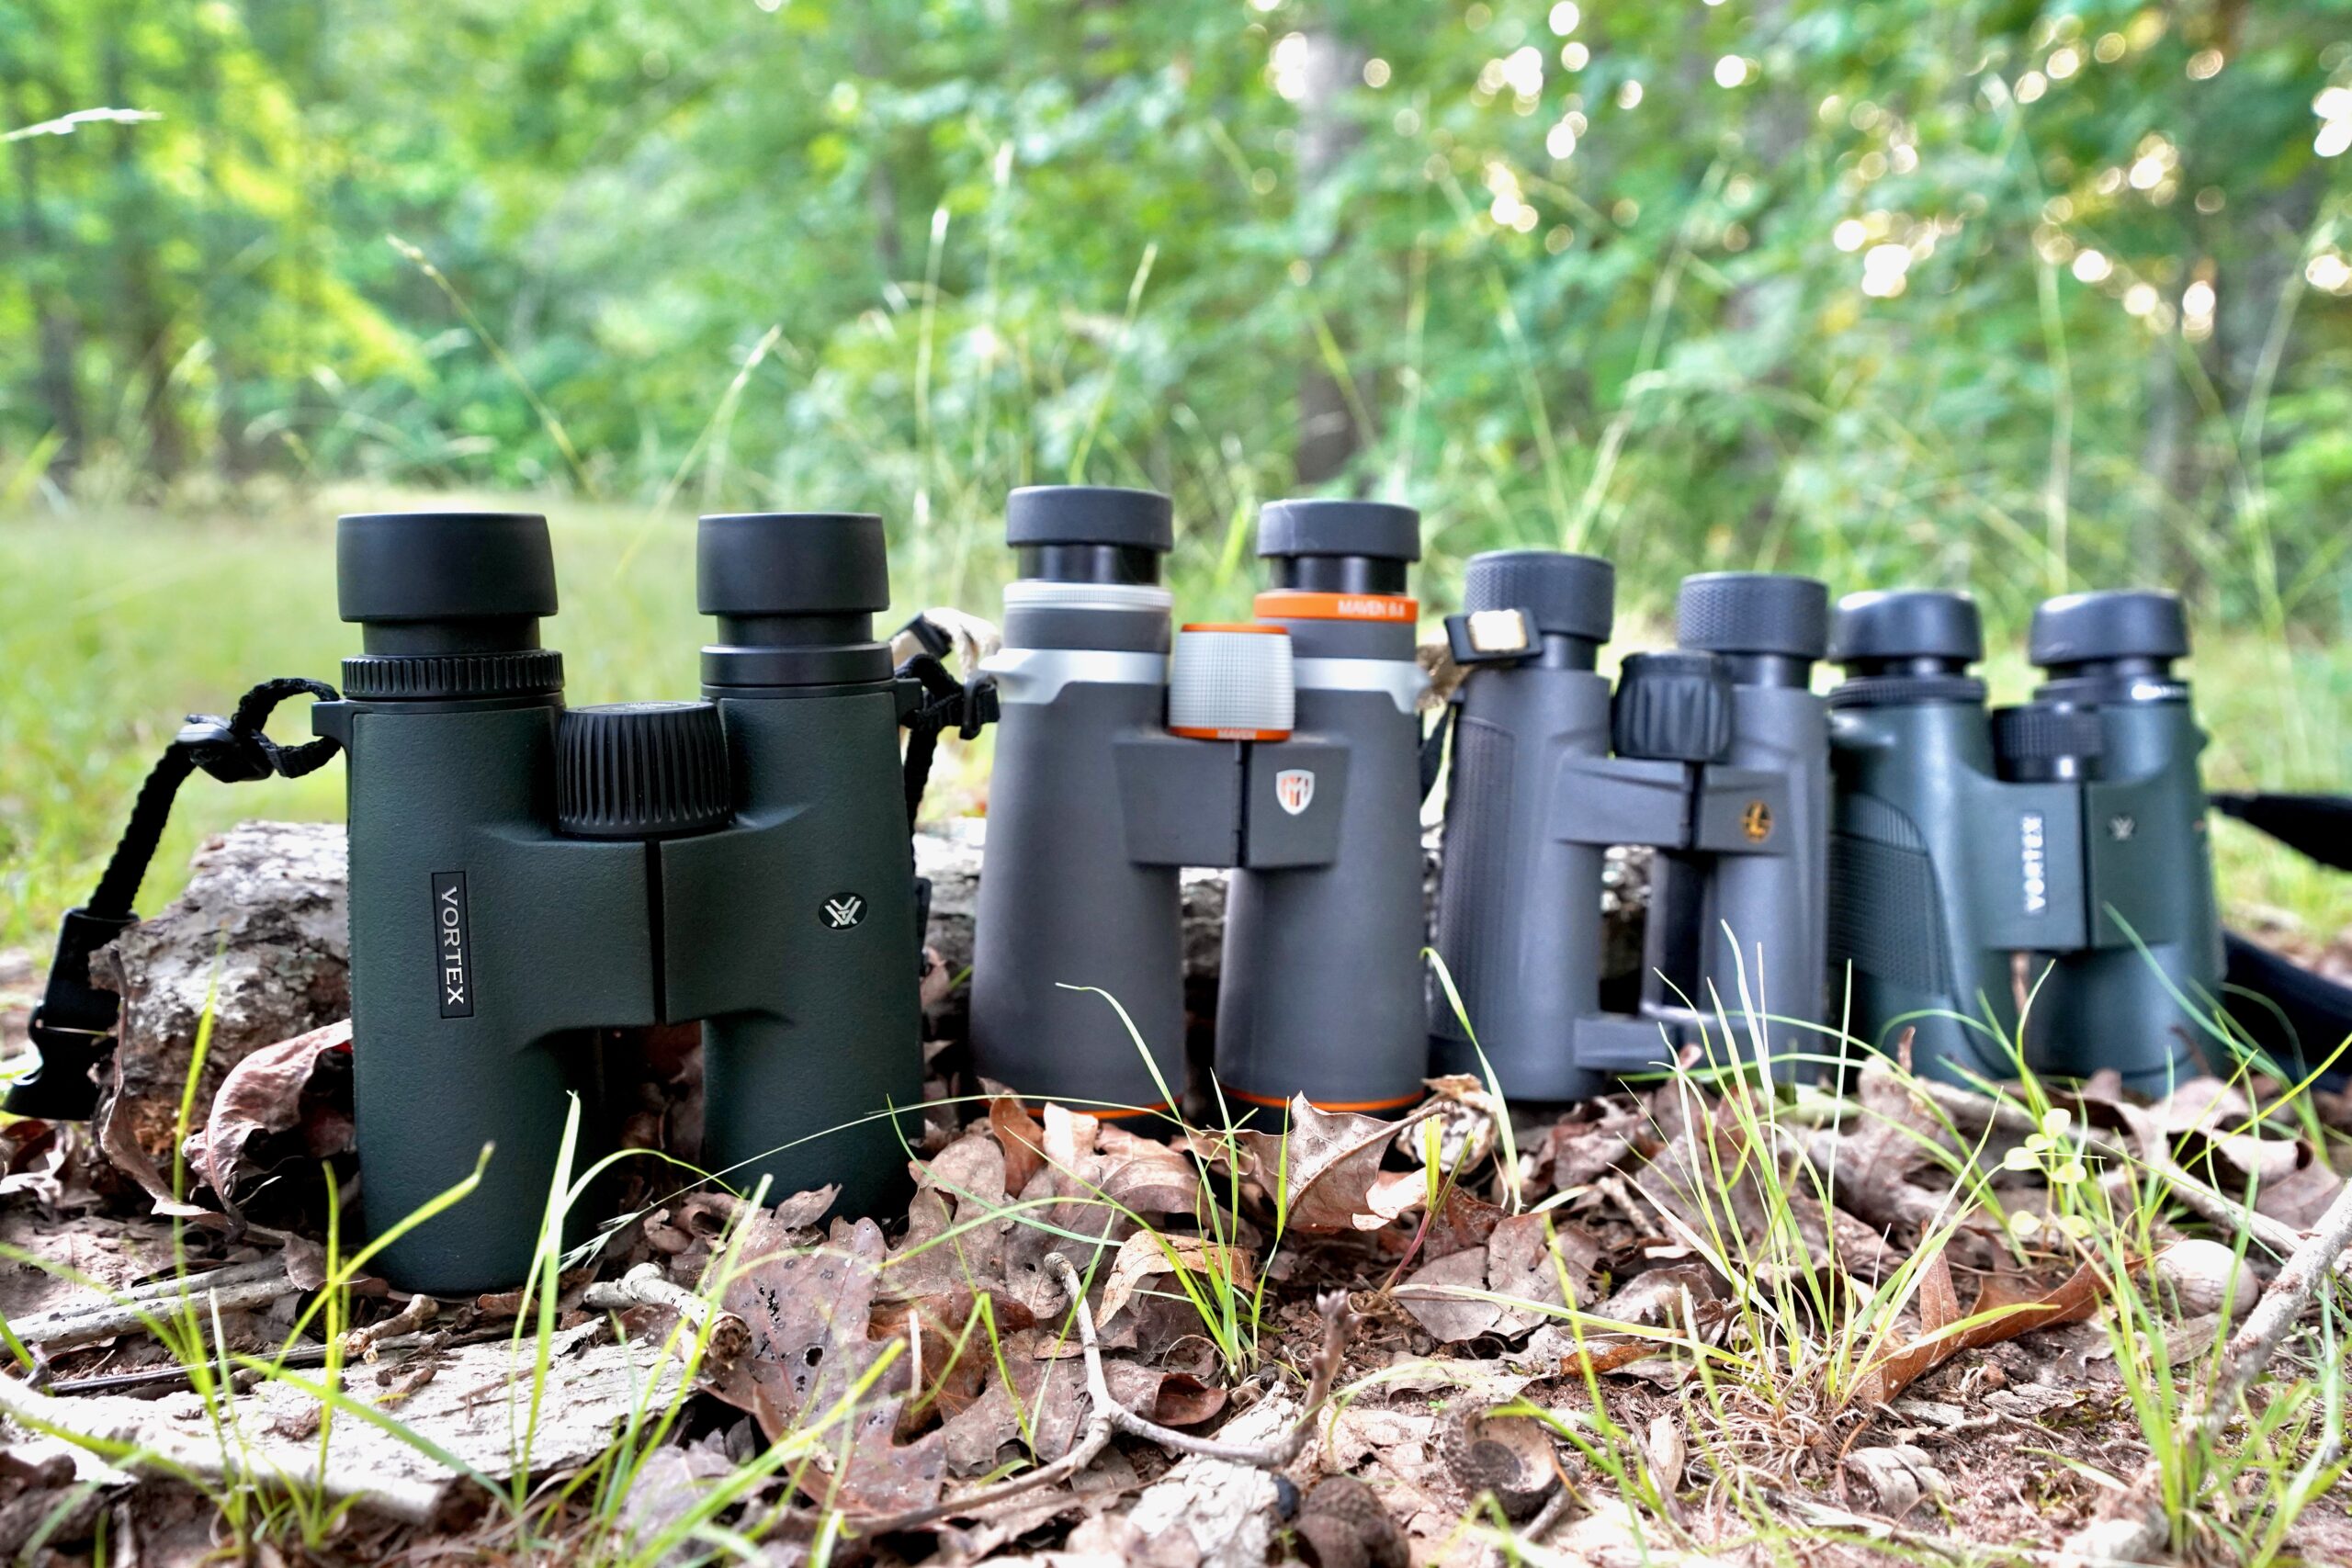 The lineup up budget binoculars in the test